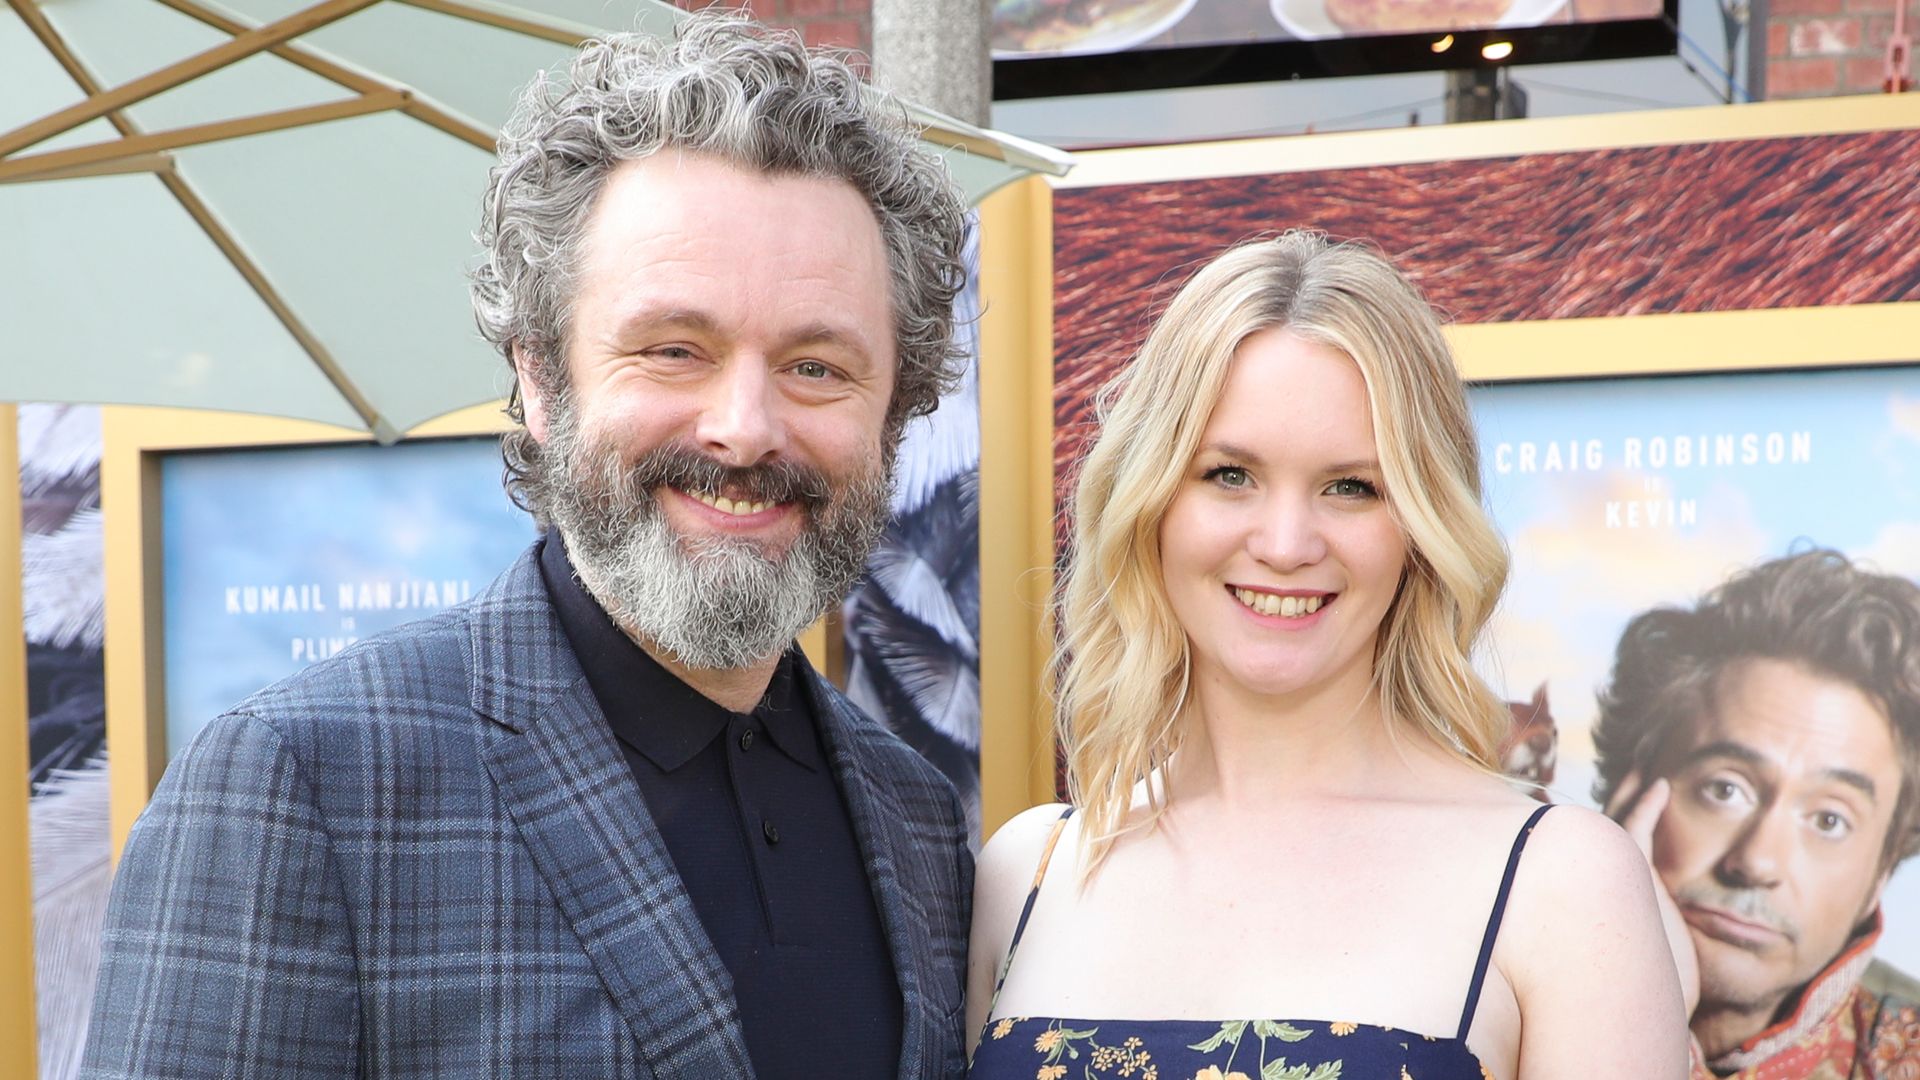 Michael Sheen's incredible reaction after being quizzed about the 25-year age gap with partner Anna Lundberg